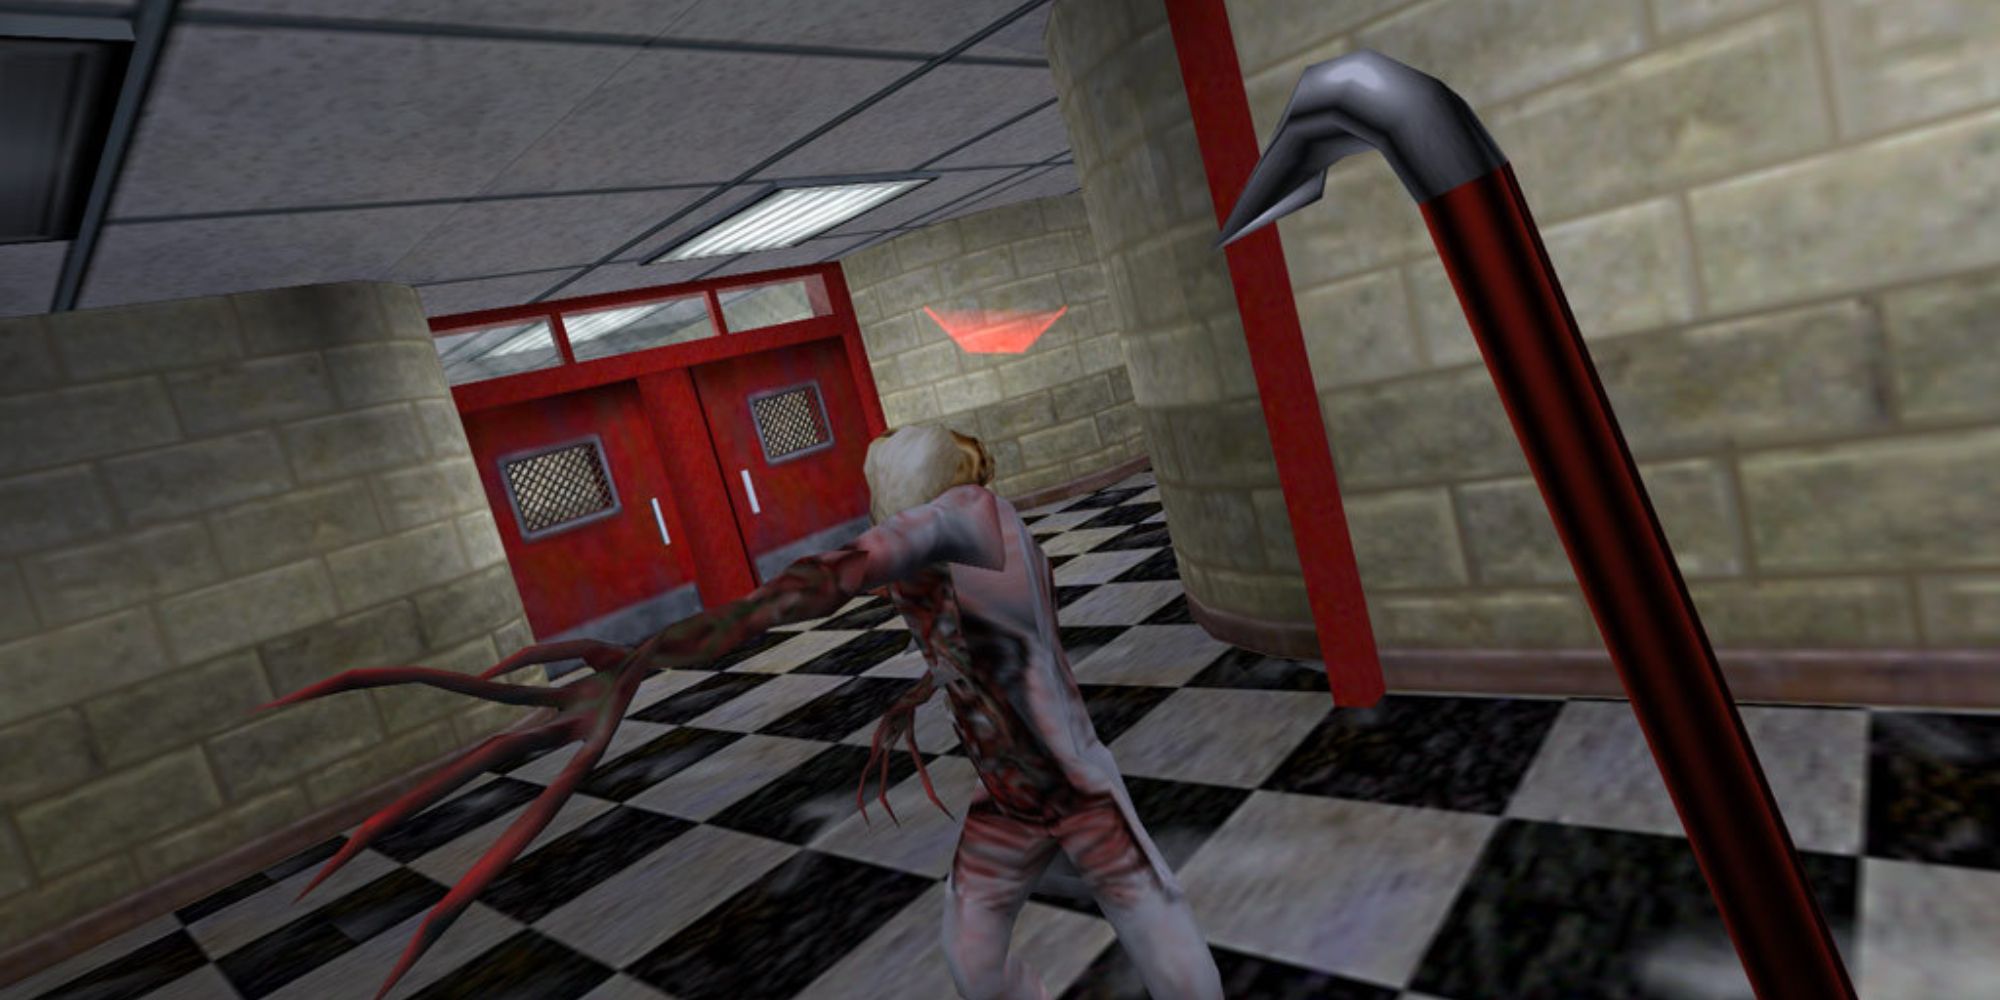 A creature attacking a player wielding a crowbar in a hallway in Half-Life